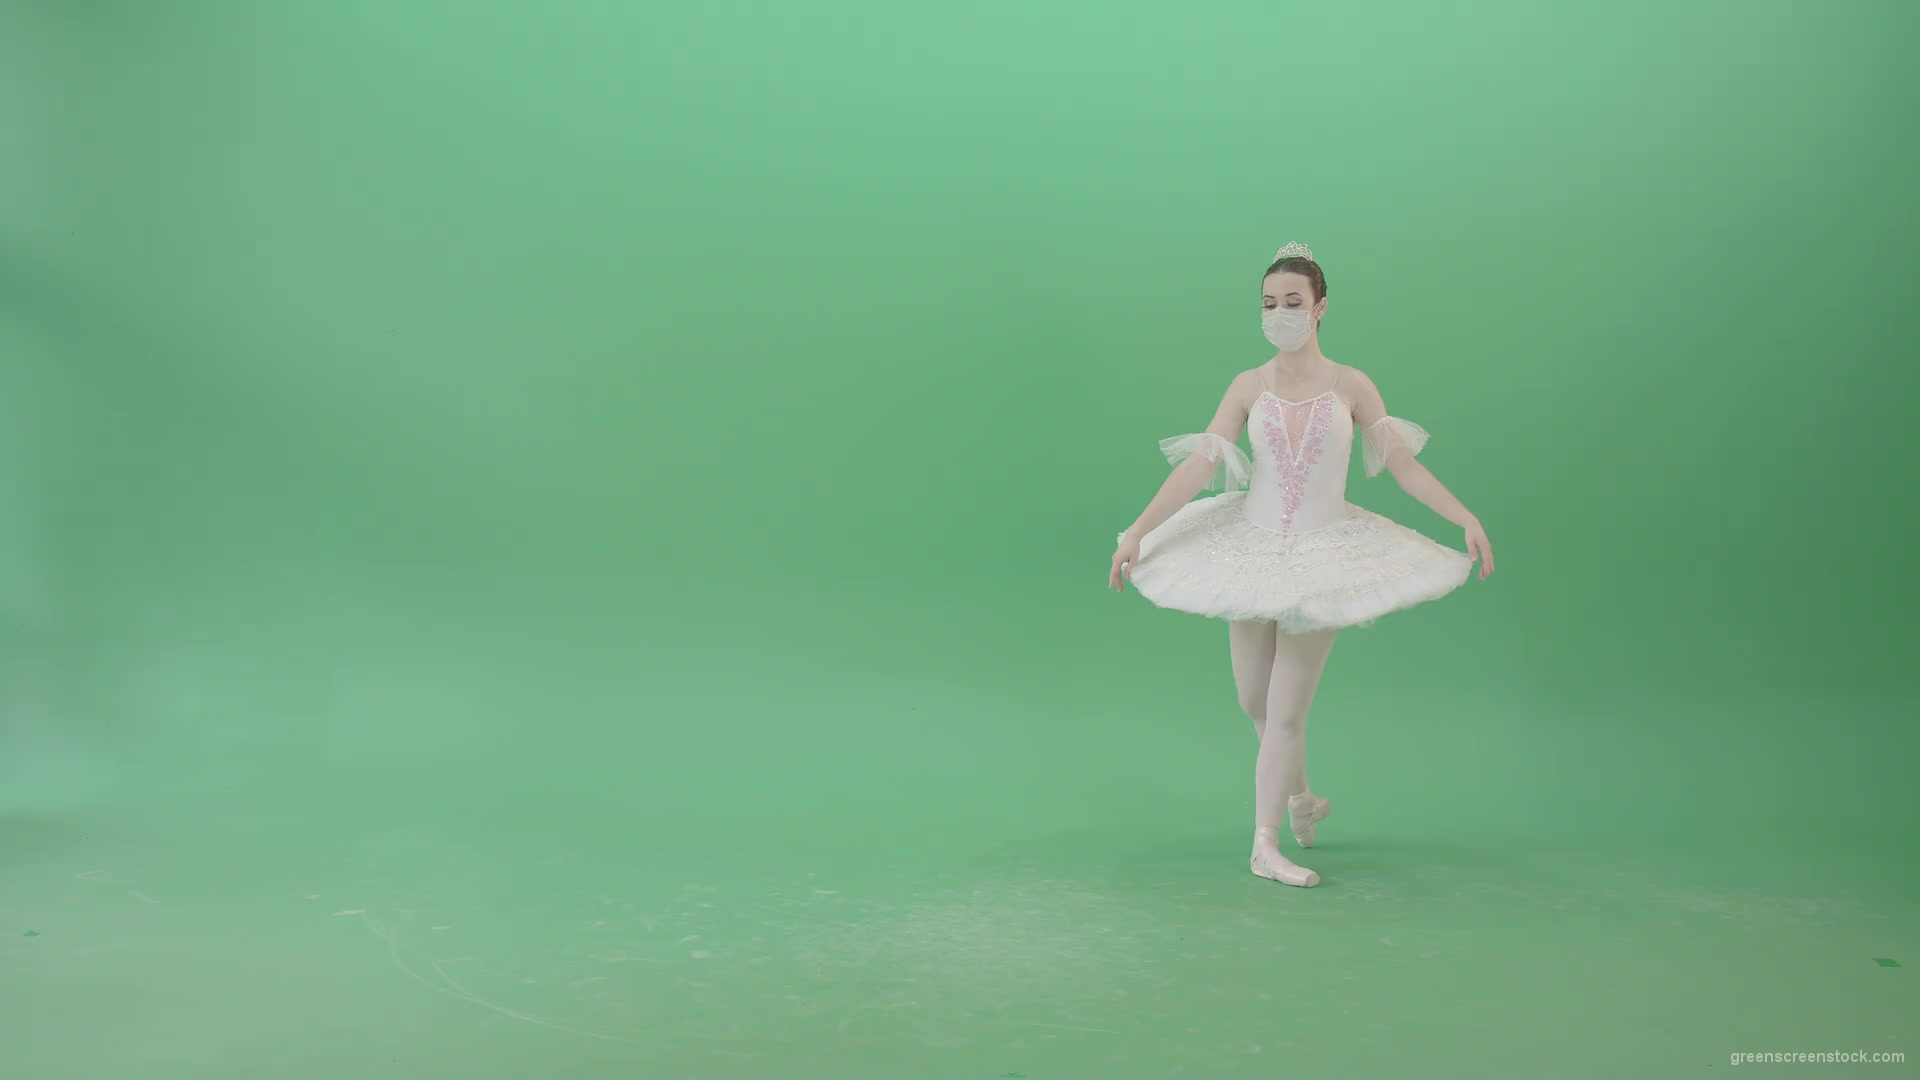 Amazing-Flowing-dance-by-Ballerina-ballet-girl-looking-for-Corona-Virus-isolated-on-Green-Screen-Viral-4K-Video-Footage-1920_001 Green Screen Stock